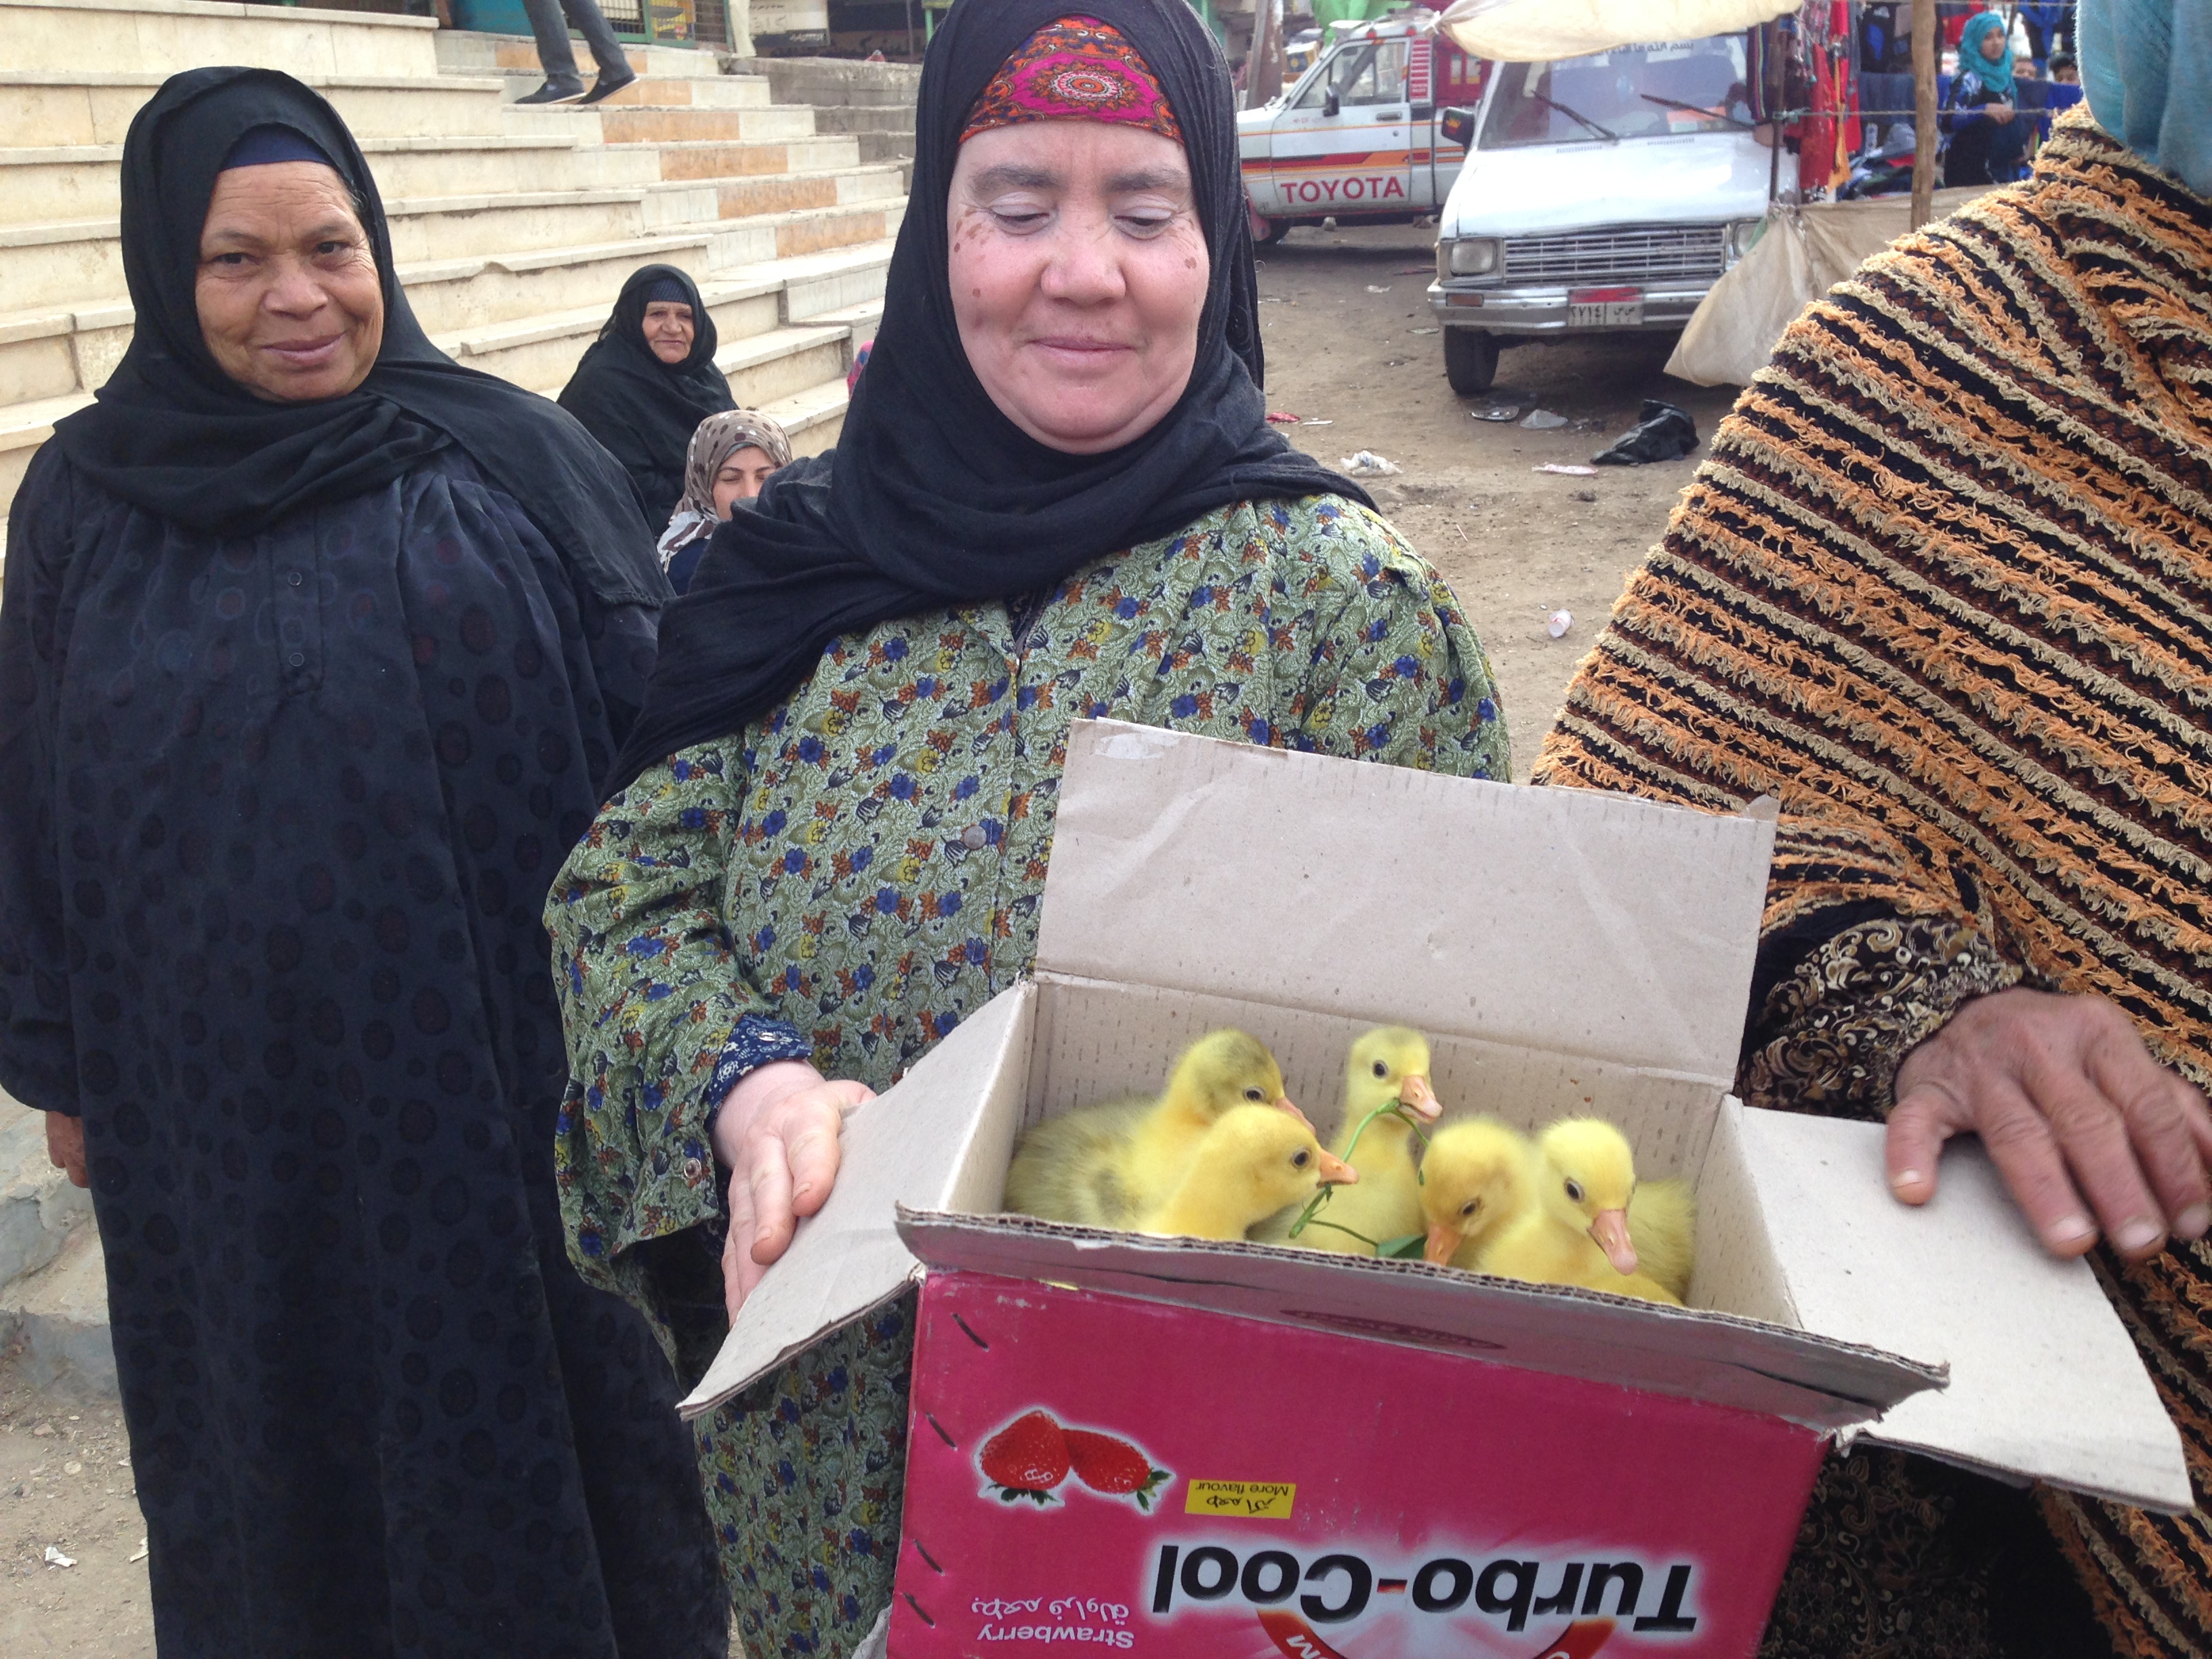 Egyptian woman holding box of ducklings